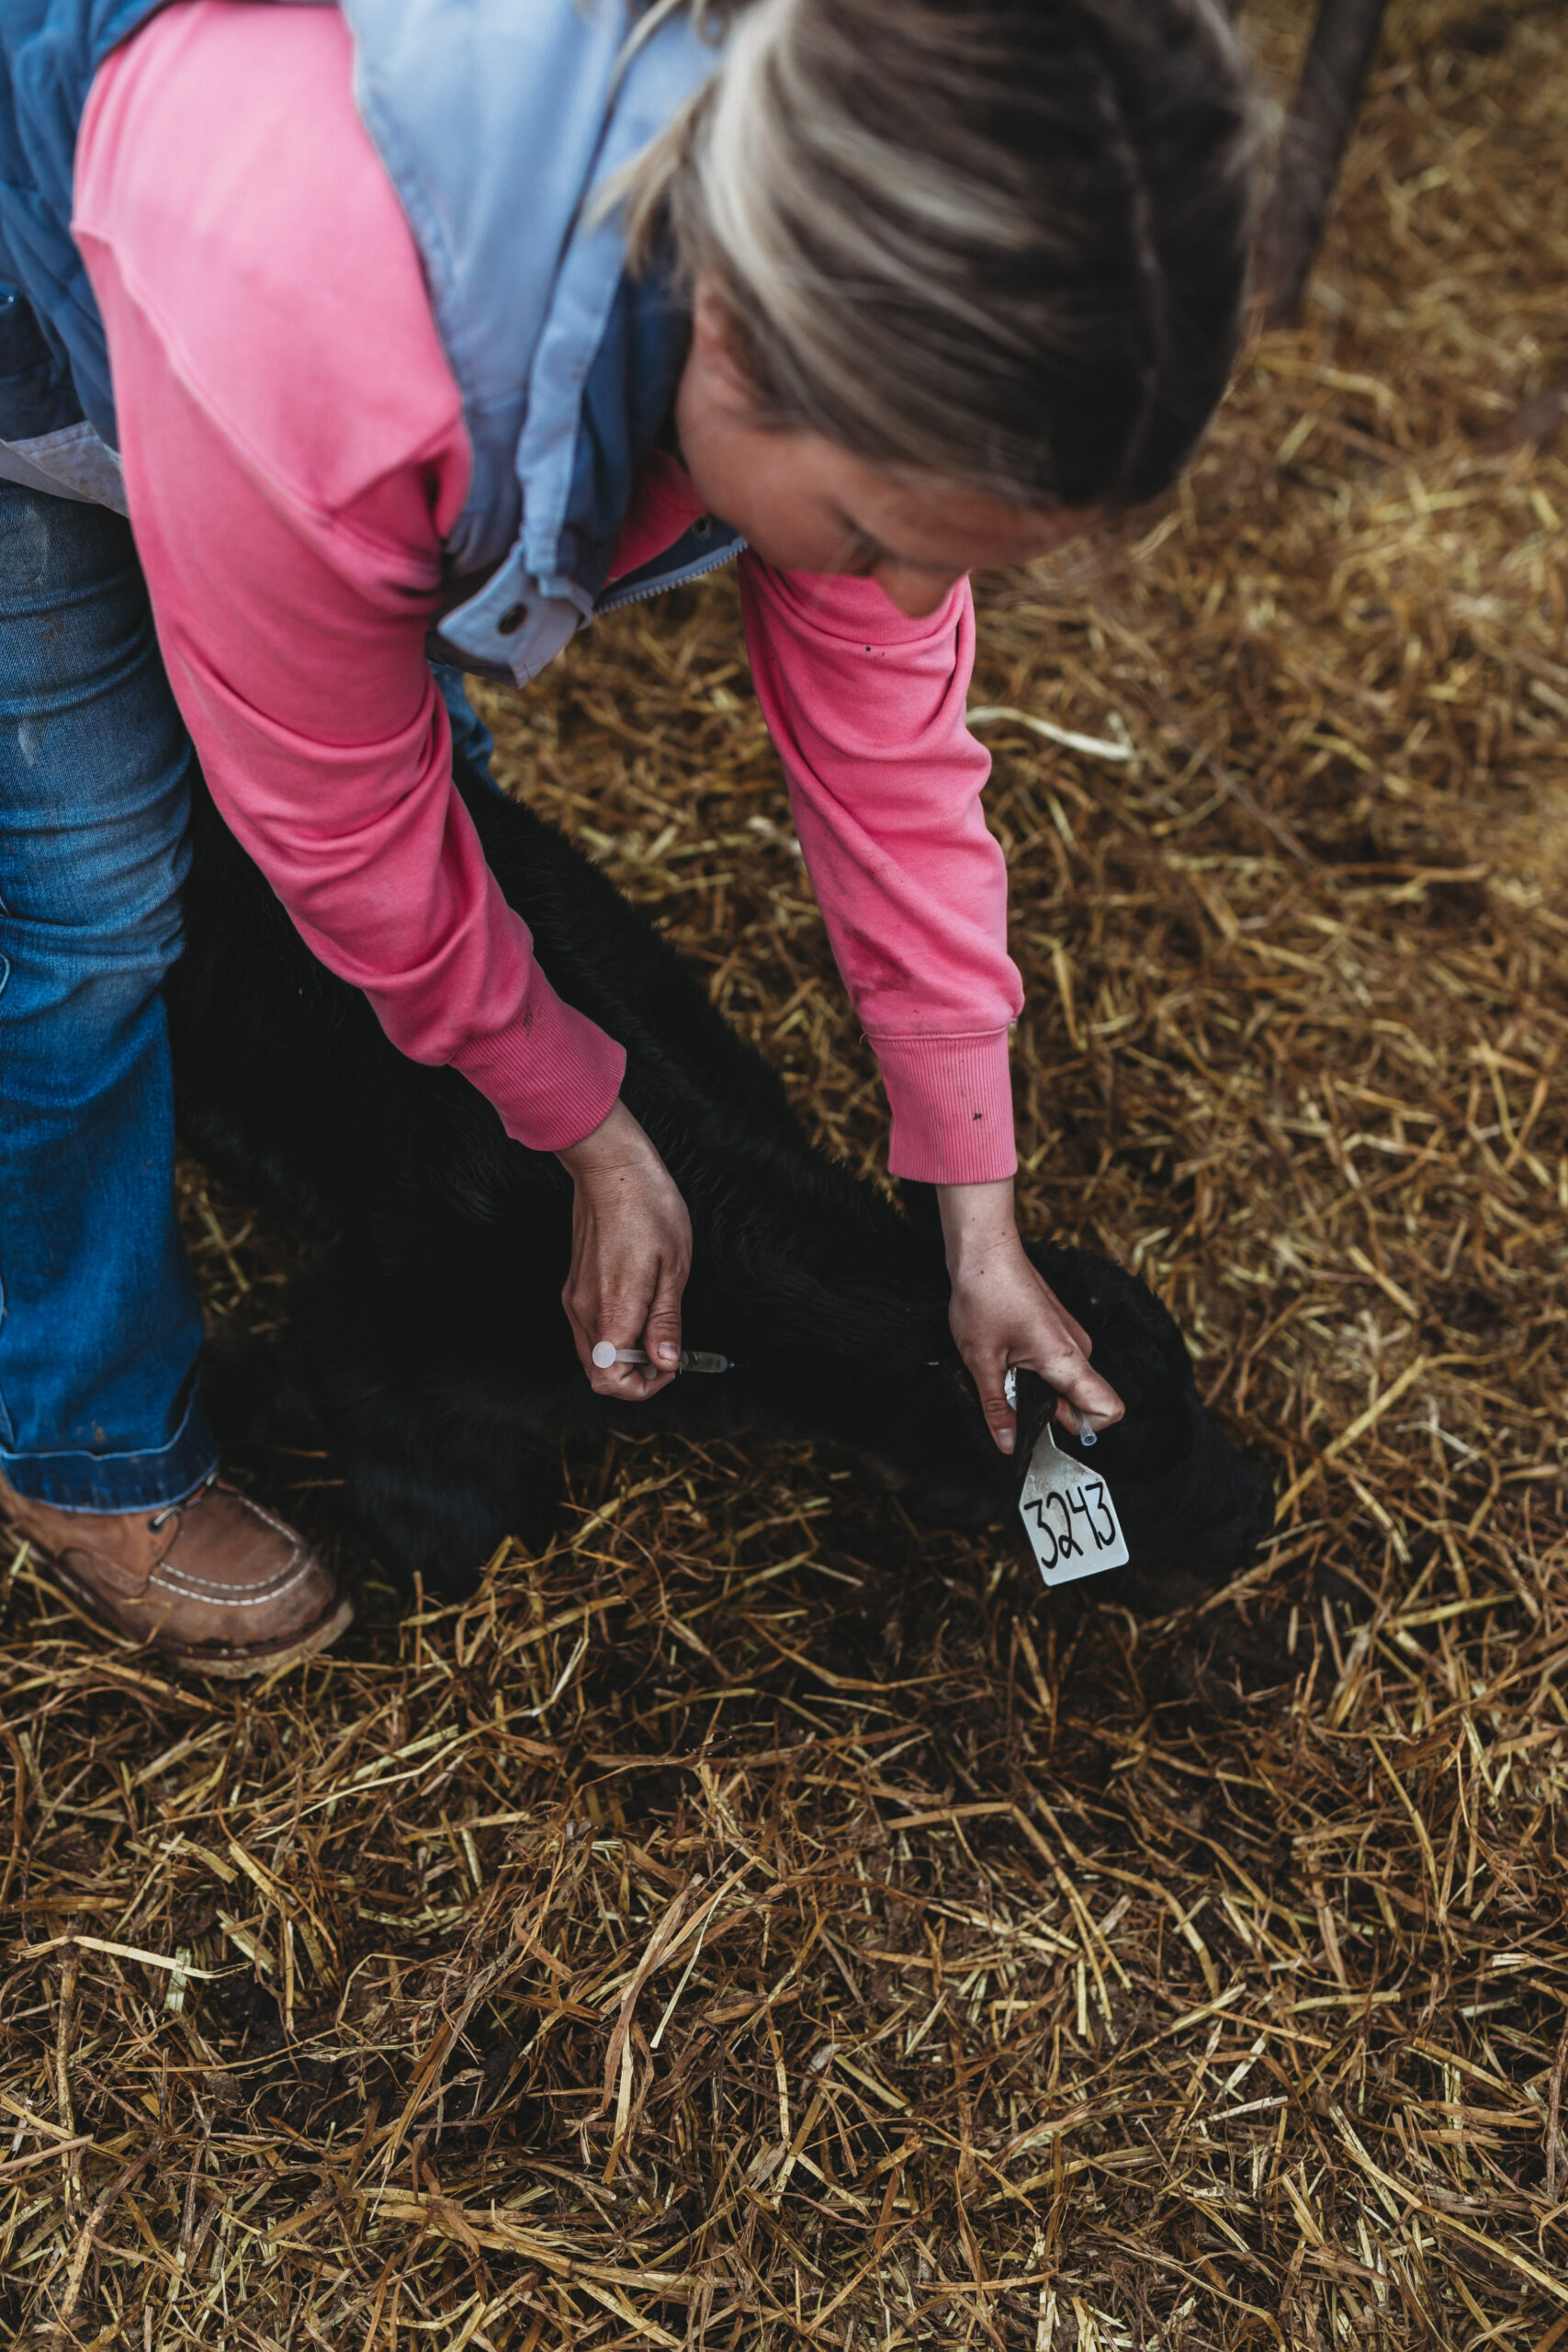 Rancher administering calf shot in the neck